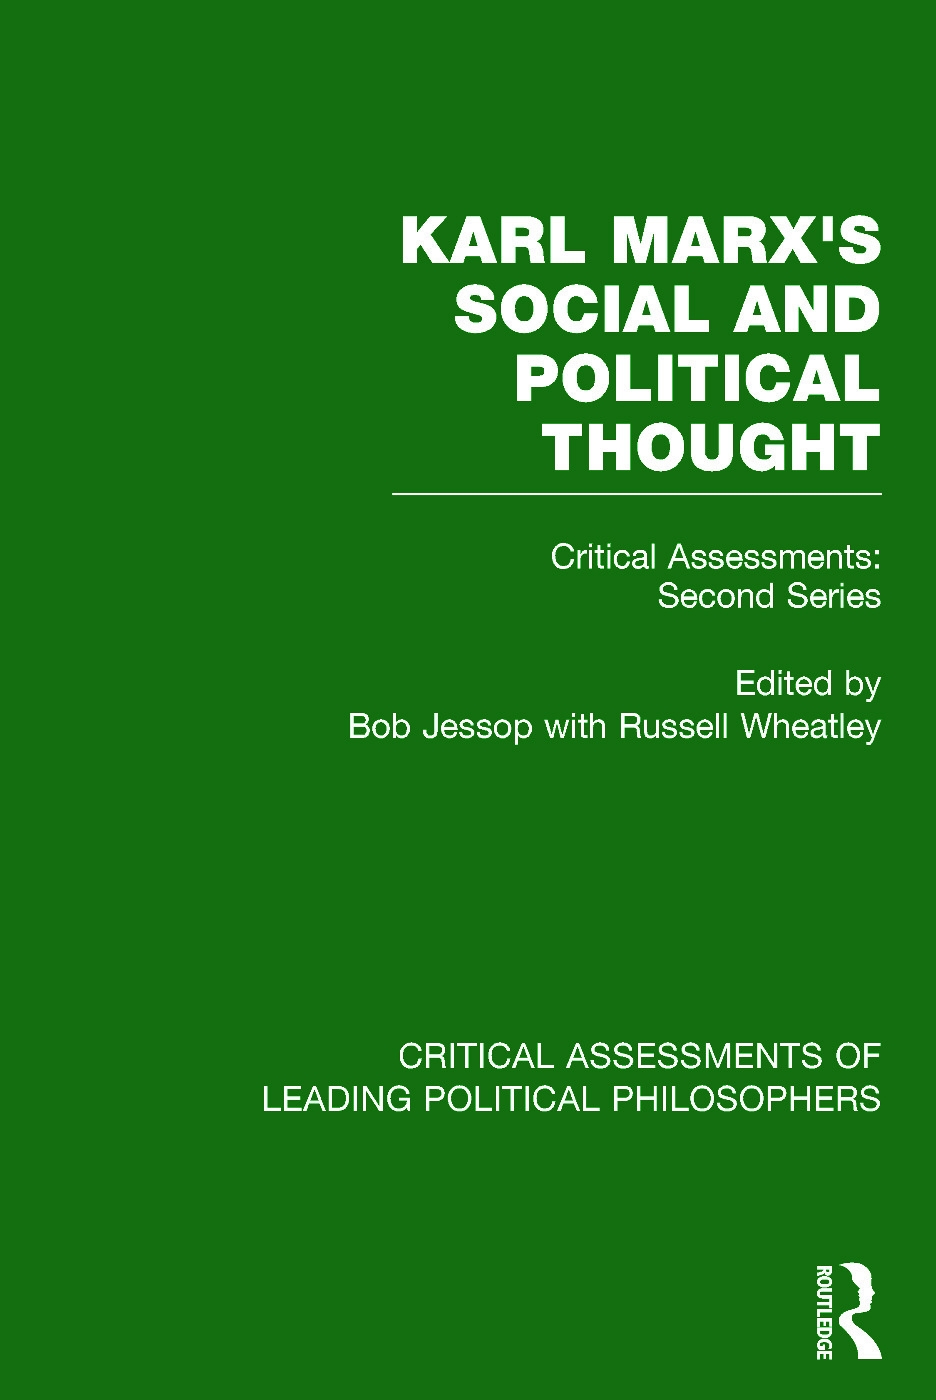 Karl Marx’s Social and Political Thought: Critical Assessments of Leading Political Philosophers : Second Series, Volumes V, Vi